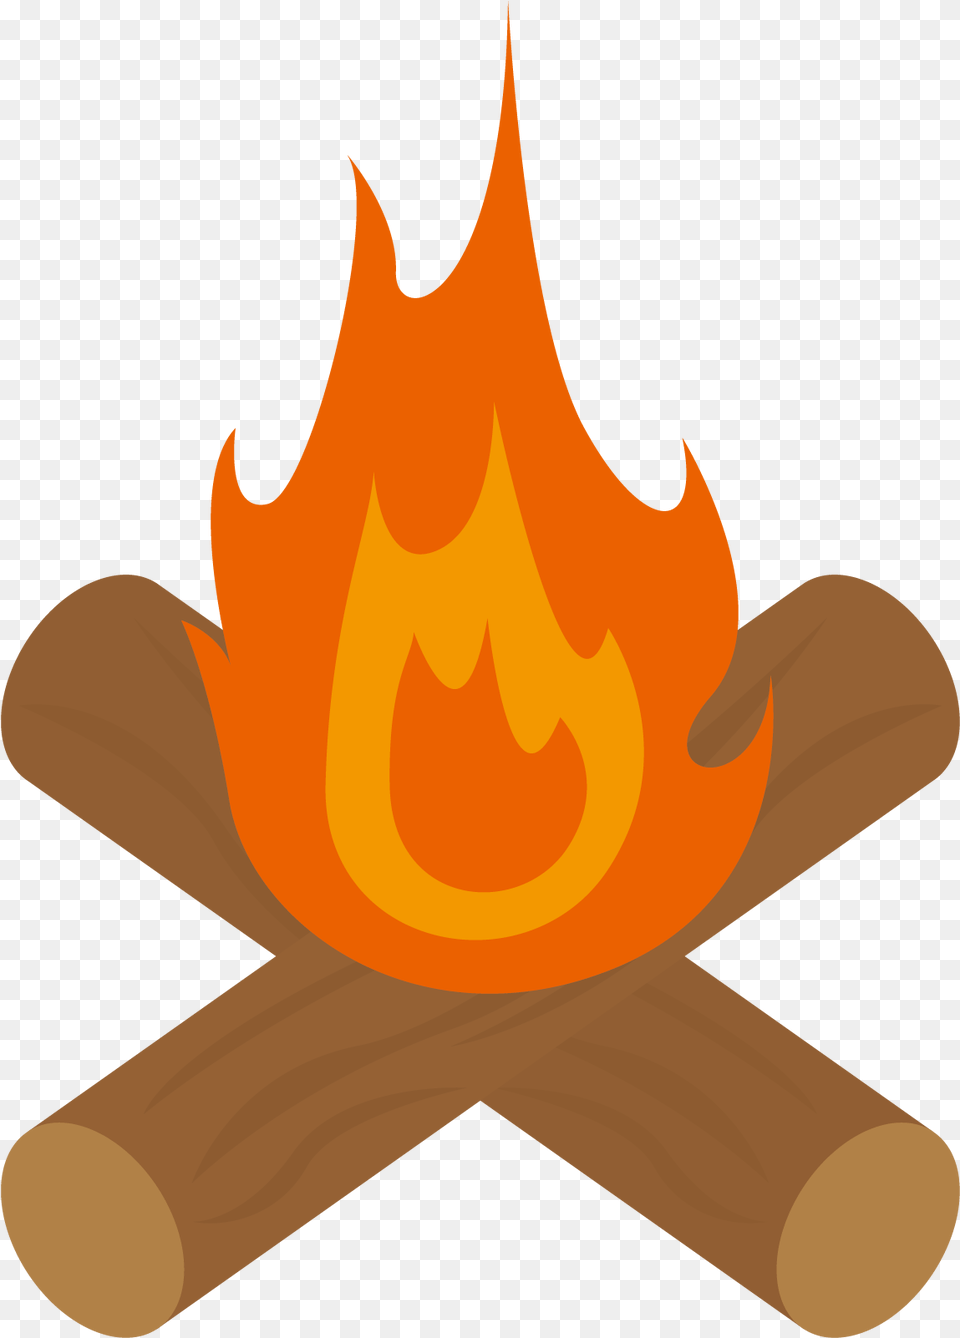 Bonfire Firewood Clip Art A Bonfire Of Firewood Fire With Wood Clipart, Flame, Person Free Png